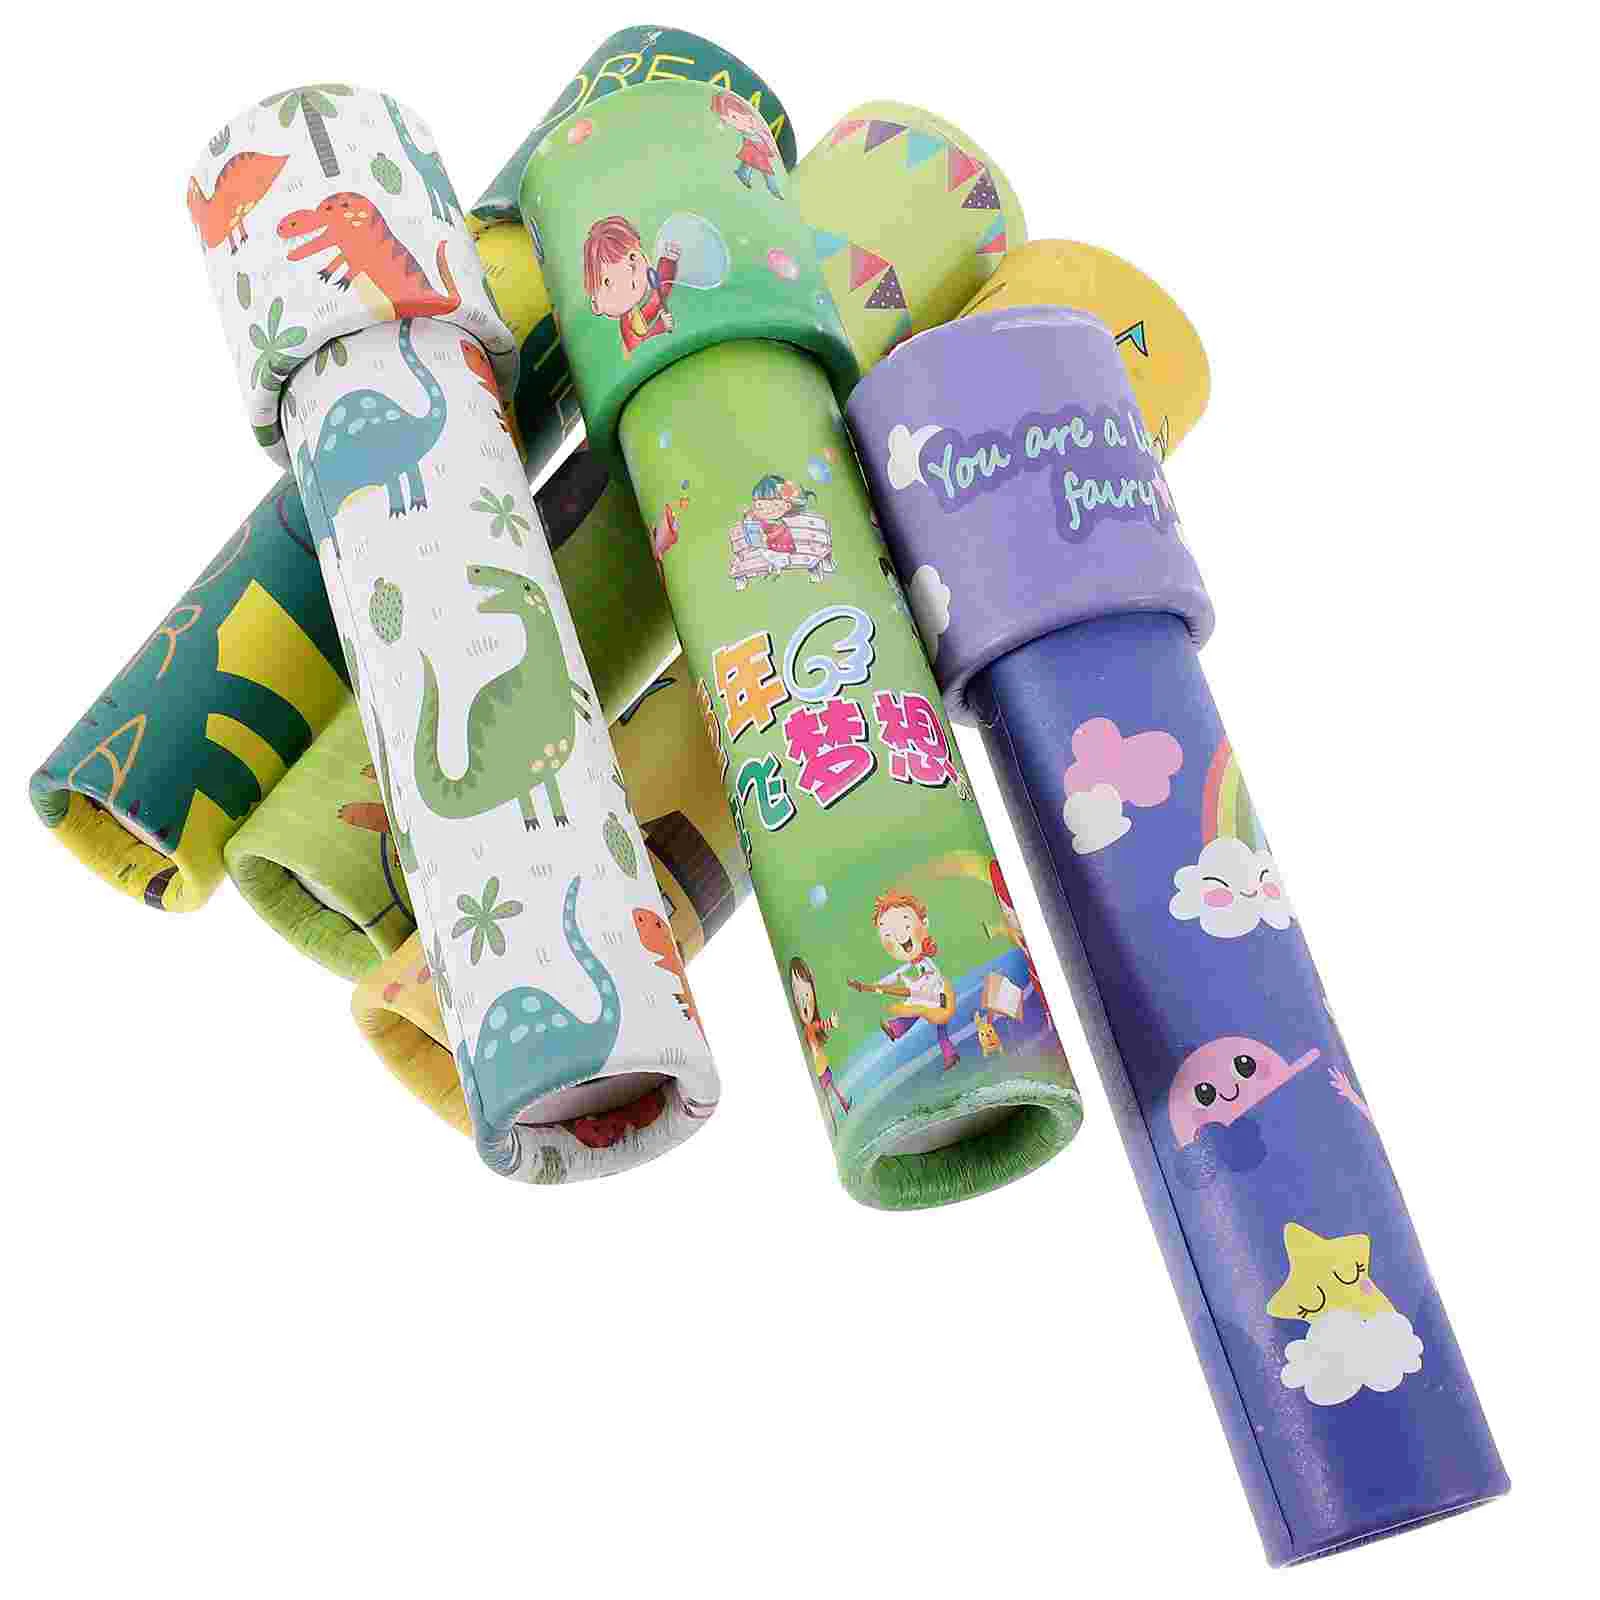 

8 Pcs Kaleidoscope Kids Plaything Children Cognitive Toy Vintage Pictures Observation Toolkit